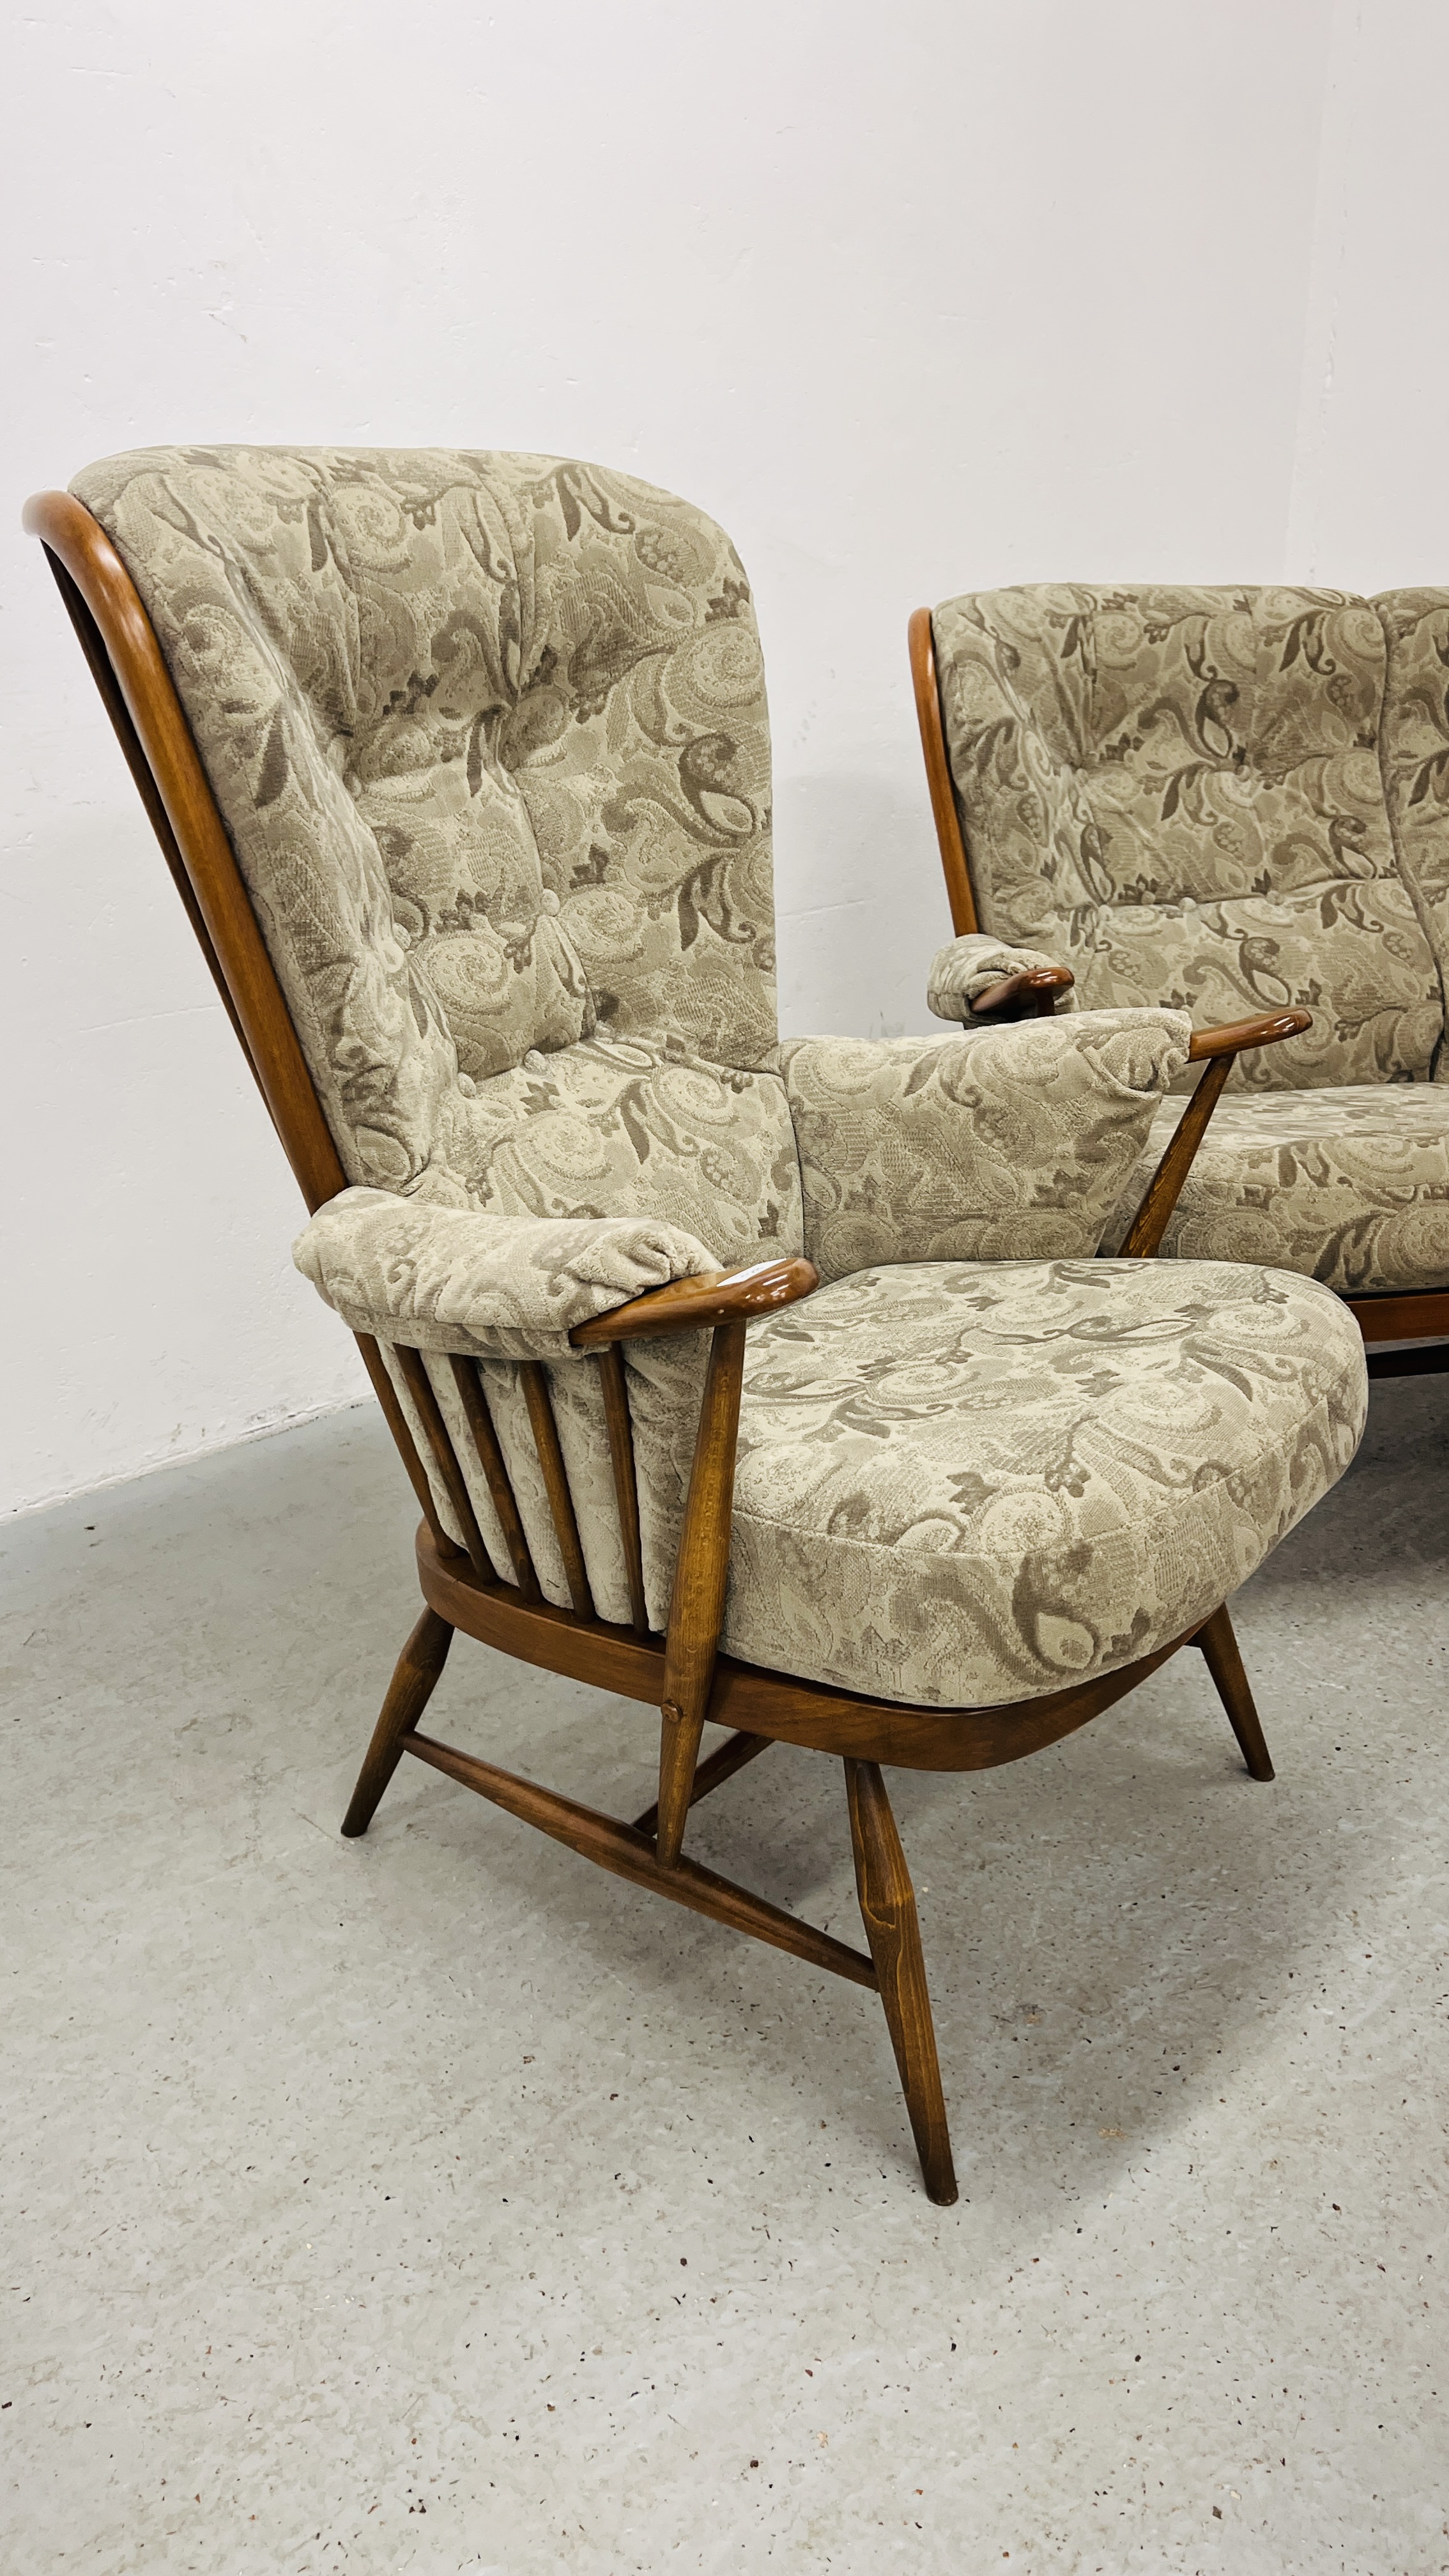 AN ERCOL "GOLDEN DAWN" FINISH COTTAGE THREE PIECE LOUNGE SUITE WITH MATCHING FOOTSTOOL - TRADE ONLY. - Image 3 of 11